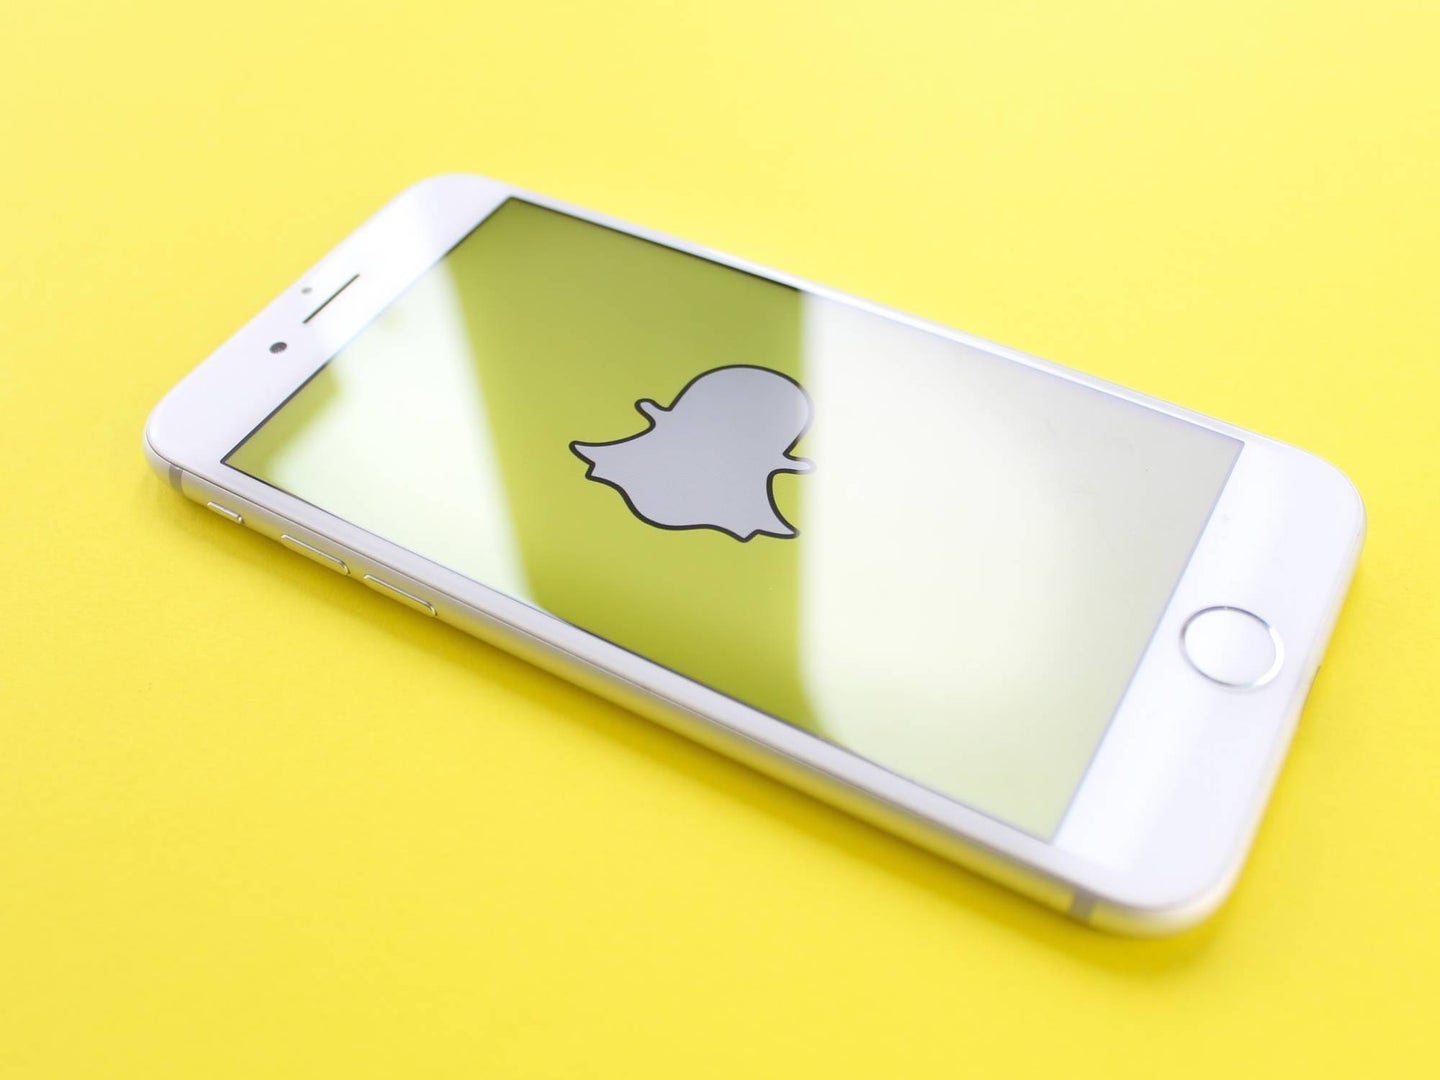 A white iPhone on a yellow background with the Snapchat ghost icon on the screen in landscape mode.